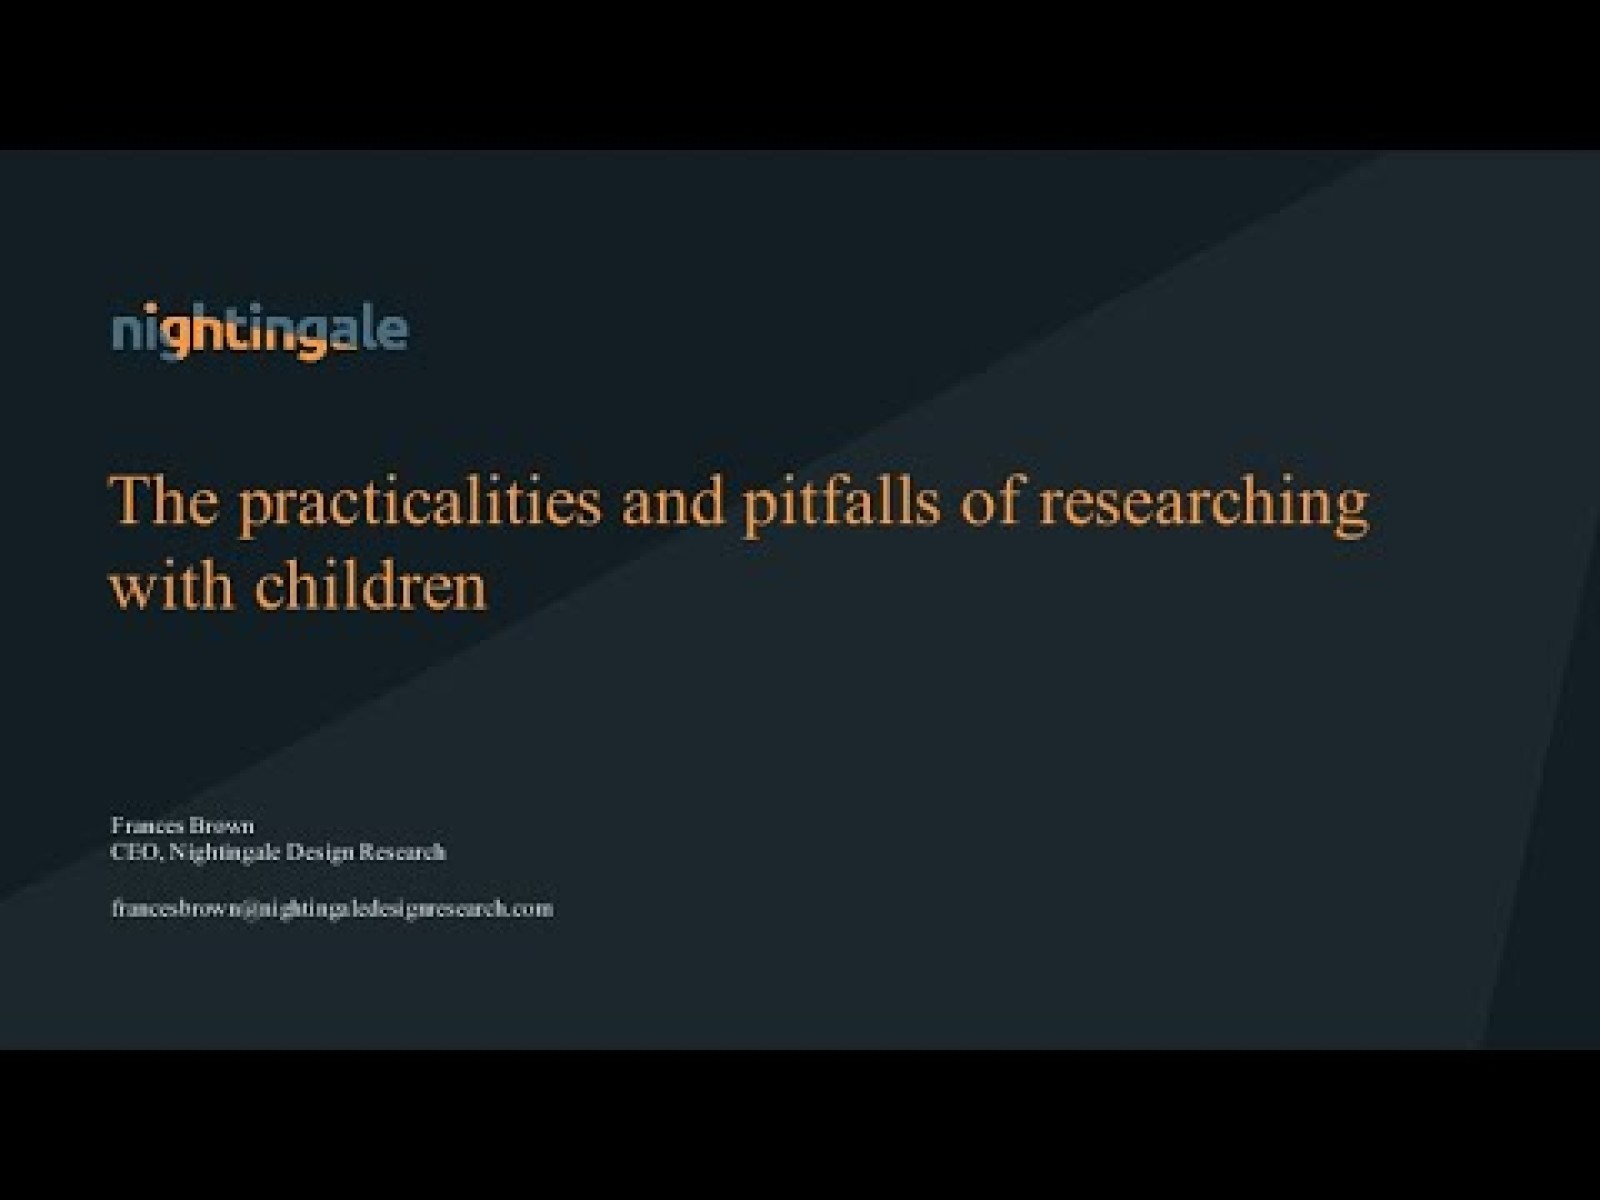 The practicalities and pitfalls of researching with children